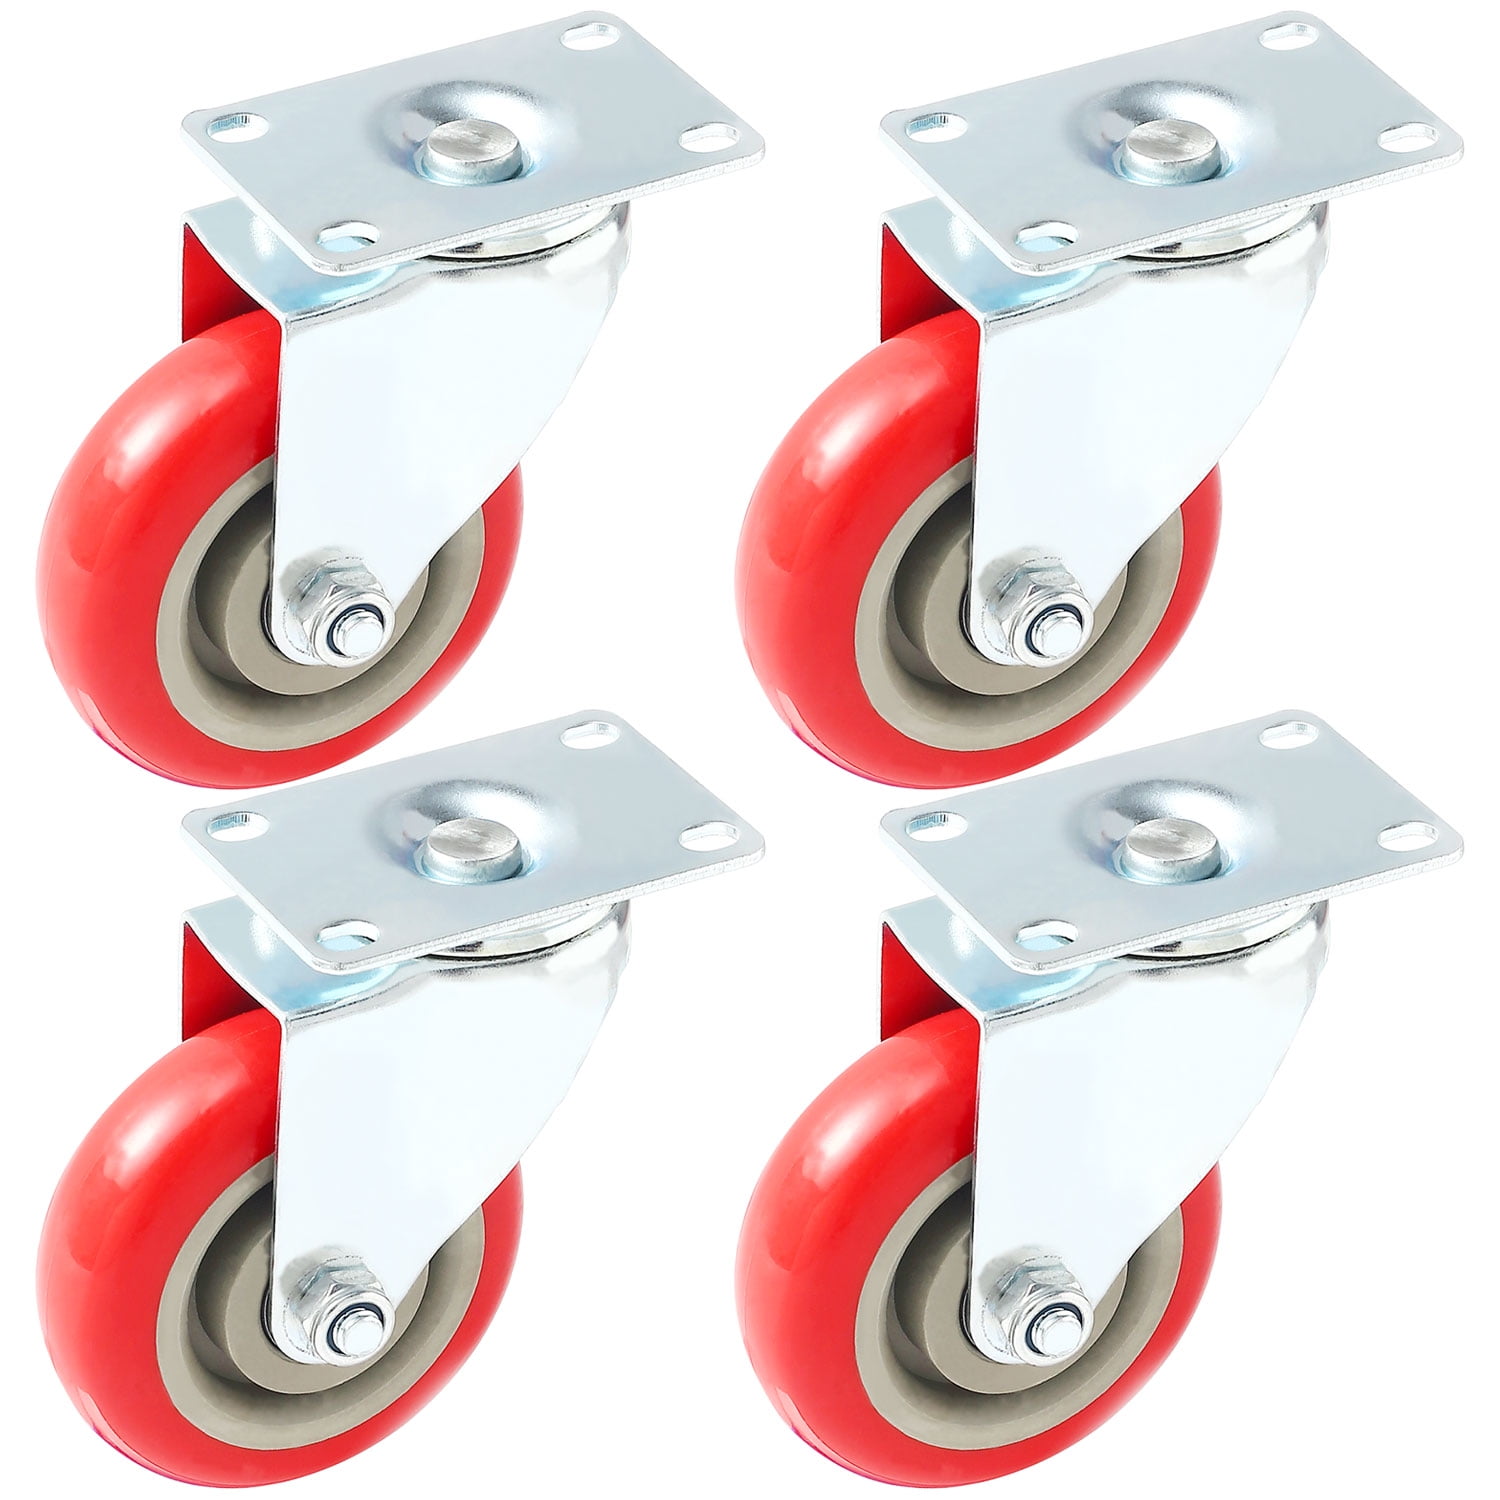 Swivel Plate Caster Wheels 3 inch Pack of 4 